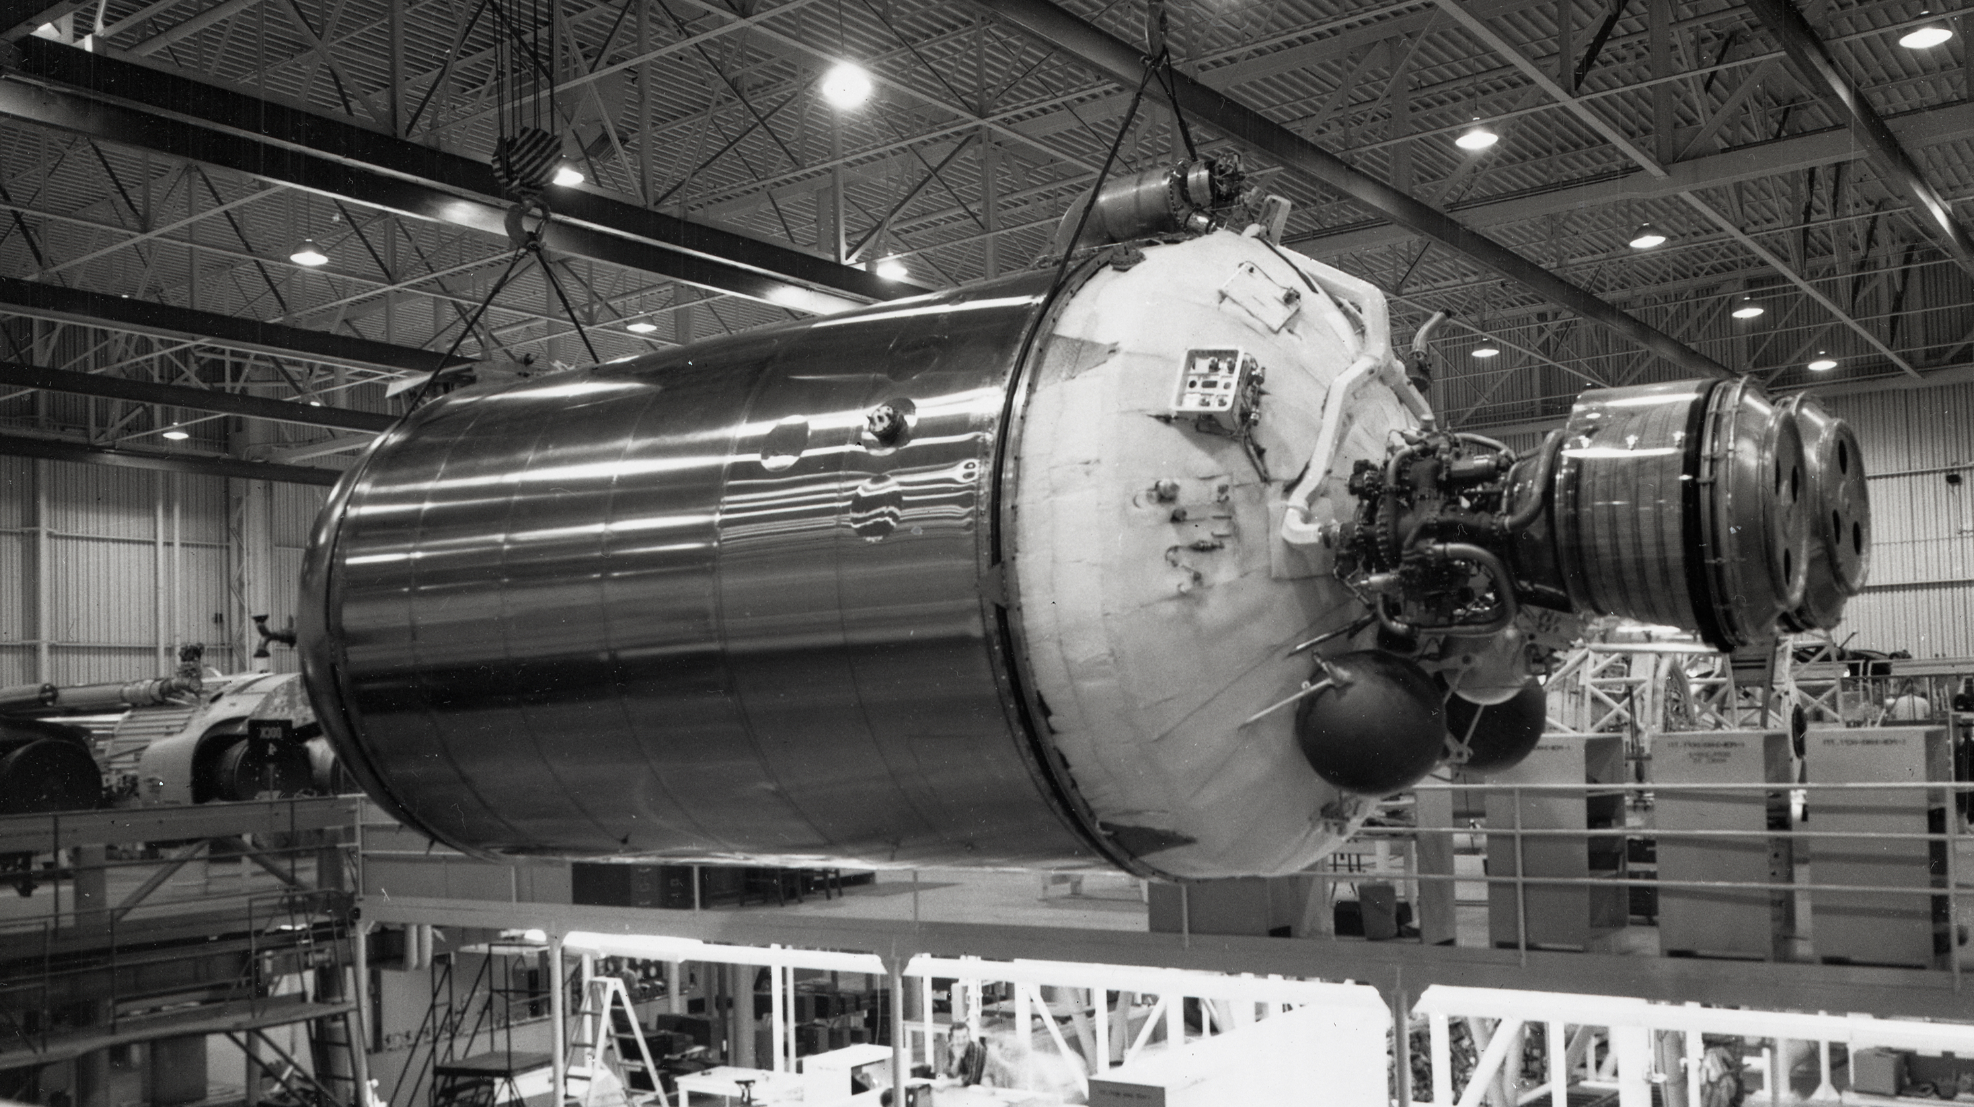 A Centaur second-stage rocket during assembly in 1962. (Image: NASA)